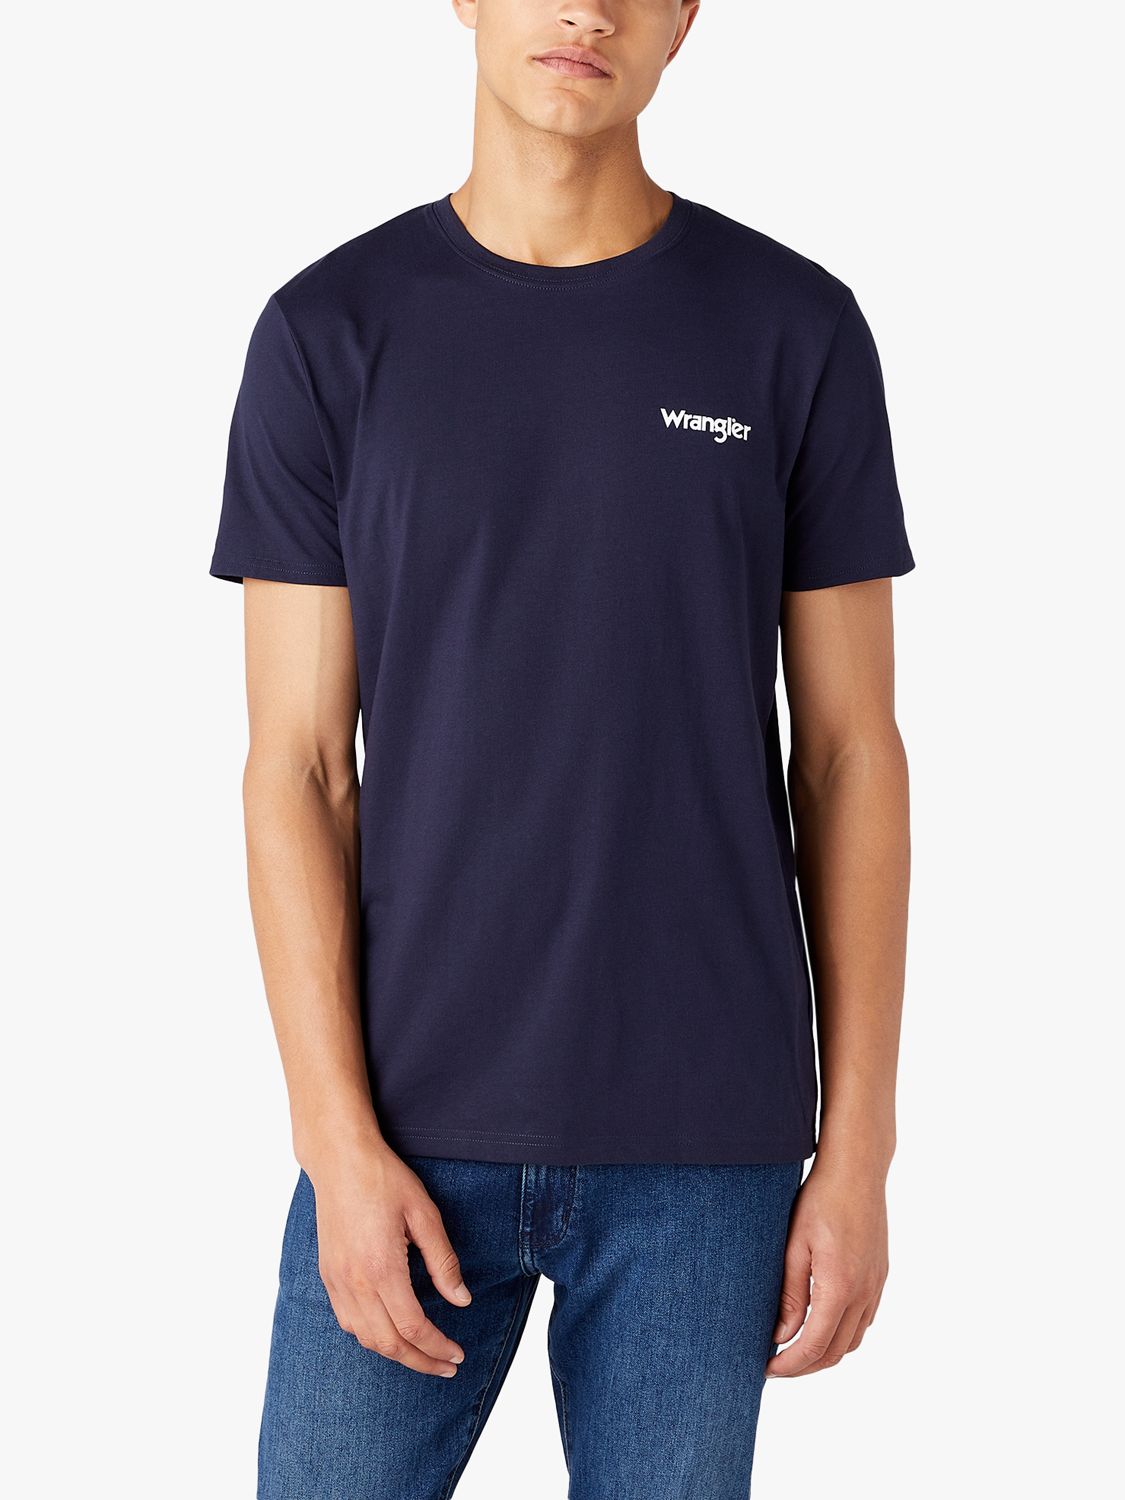 Wrangler Sign Off Crew Neck Cotton T-Shirt, Pack of 2, Navy/White at John  Lewis & Partners